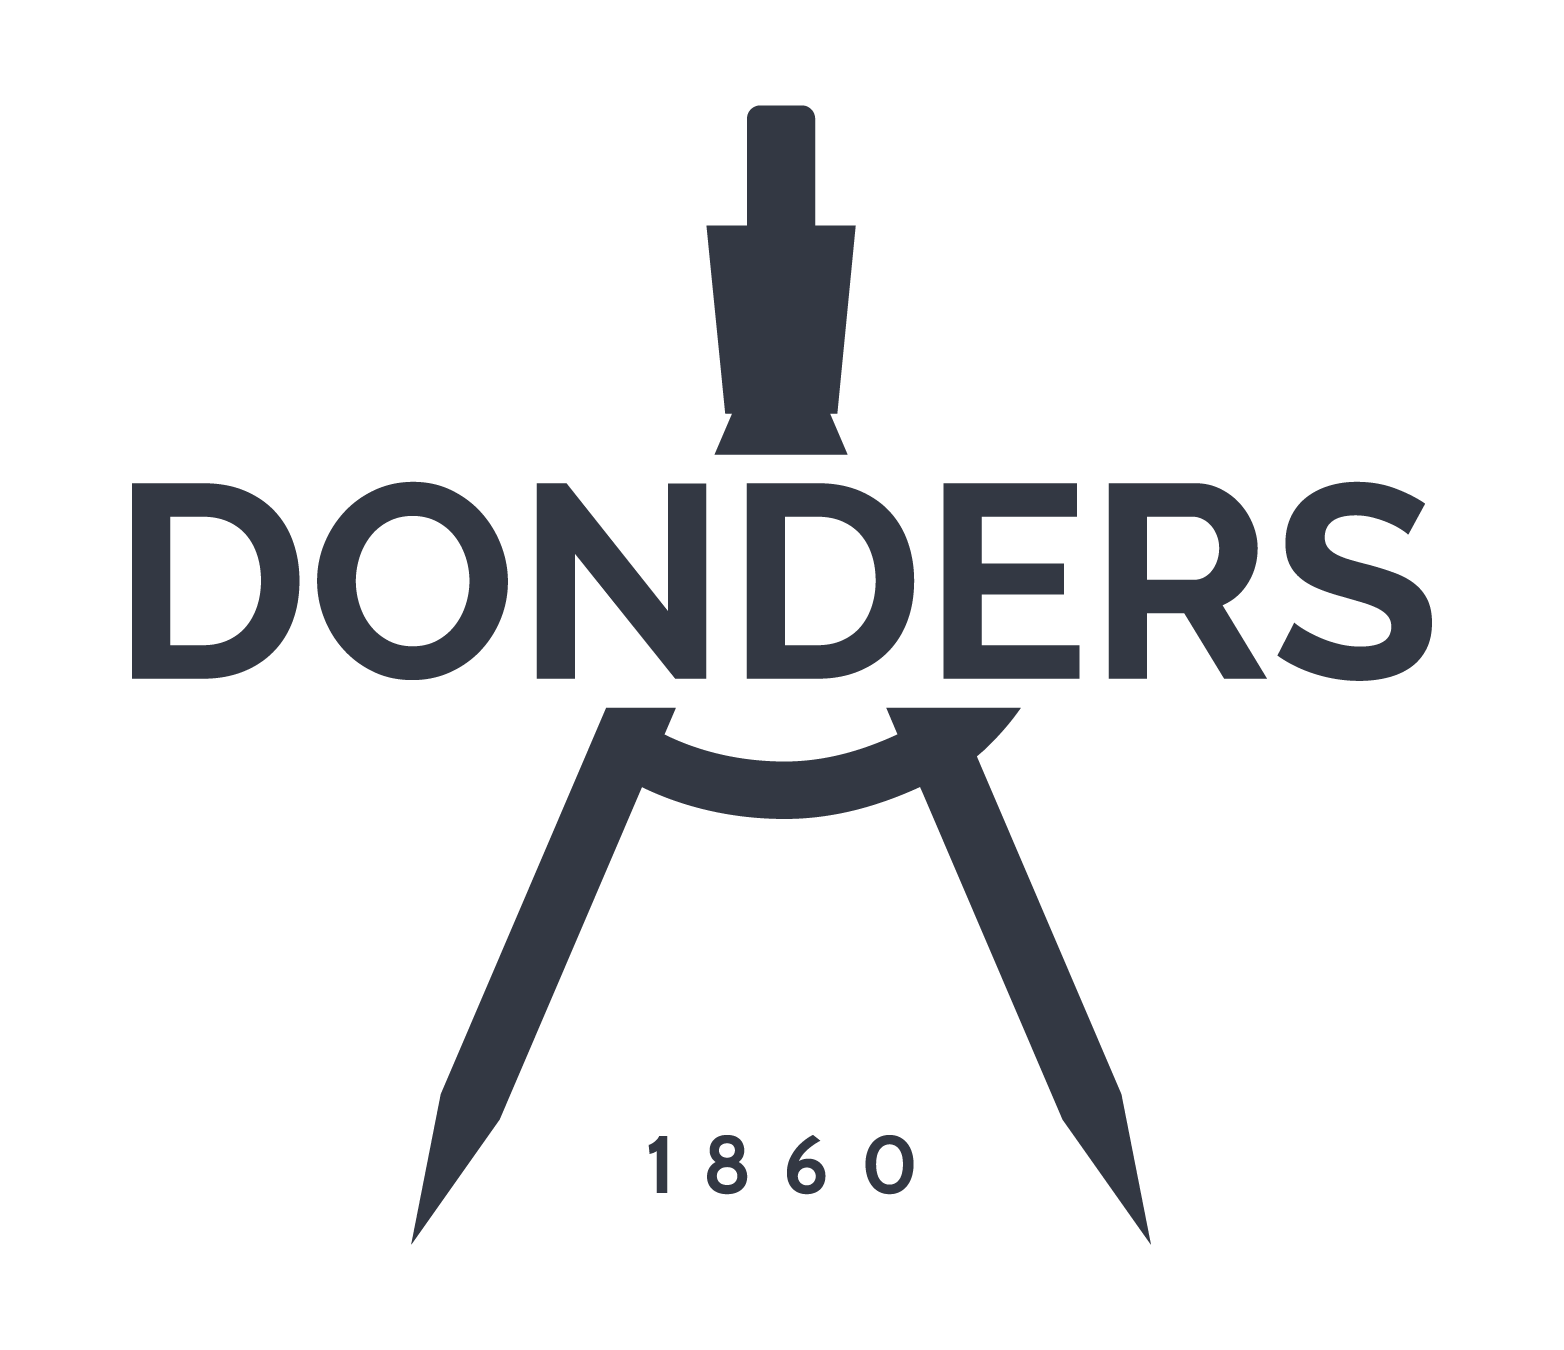 Donders Fahion Logo - Blue10 referentie